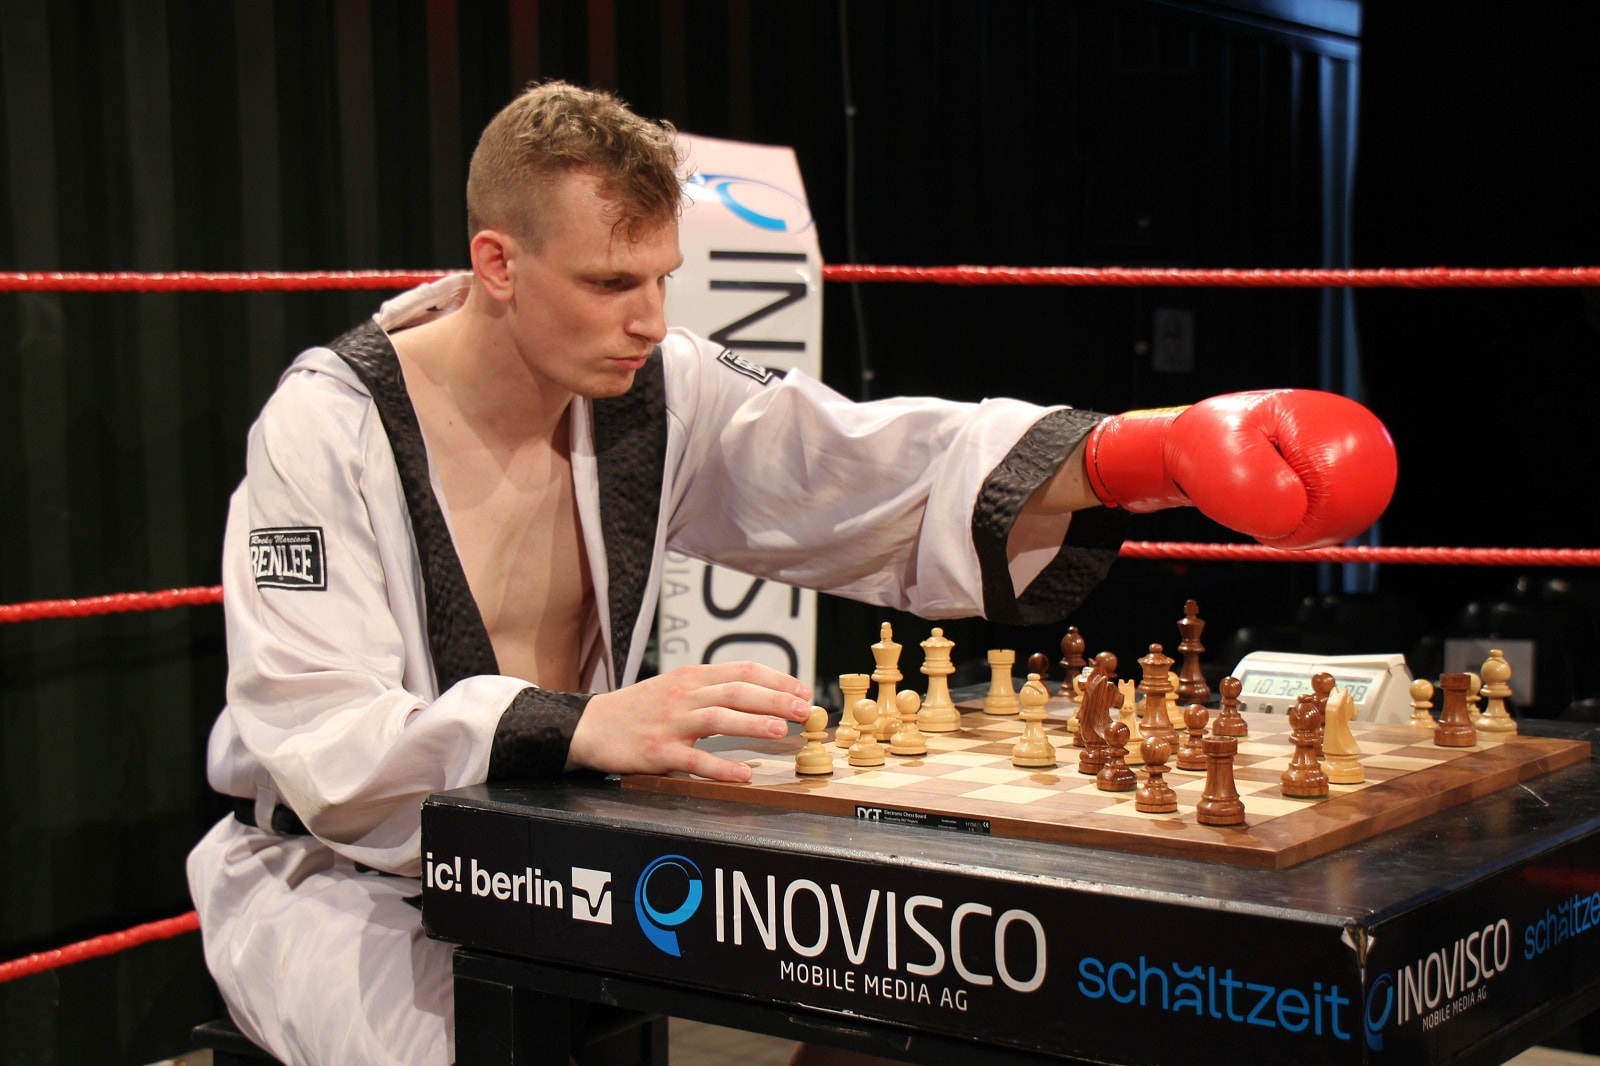 The new sport for those with brains AND brawn it's chess-boxing